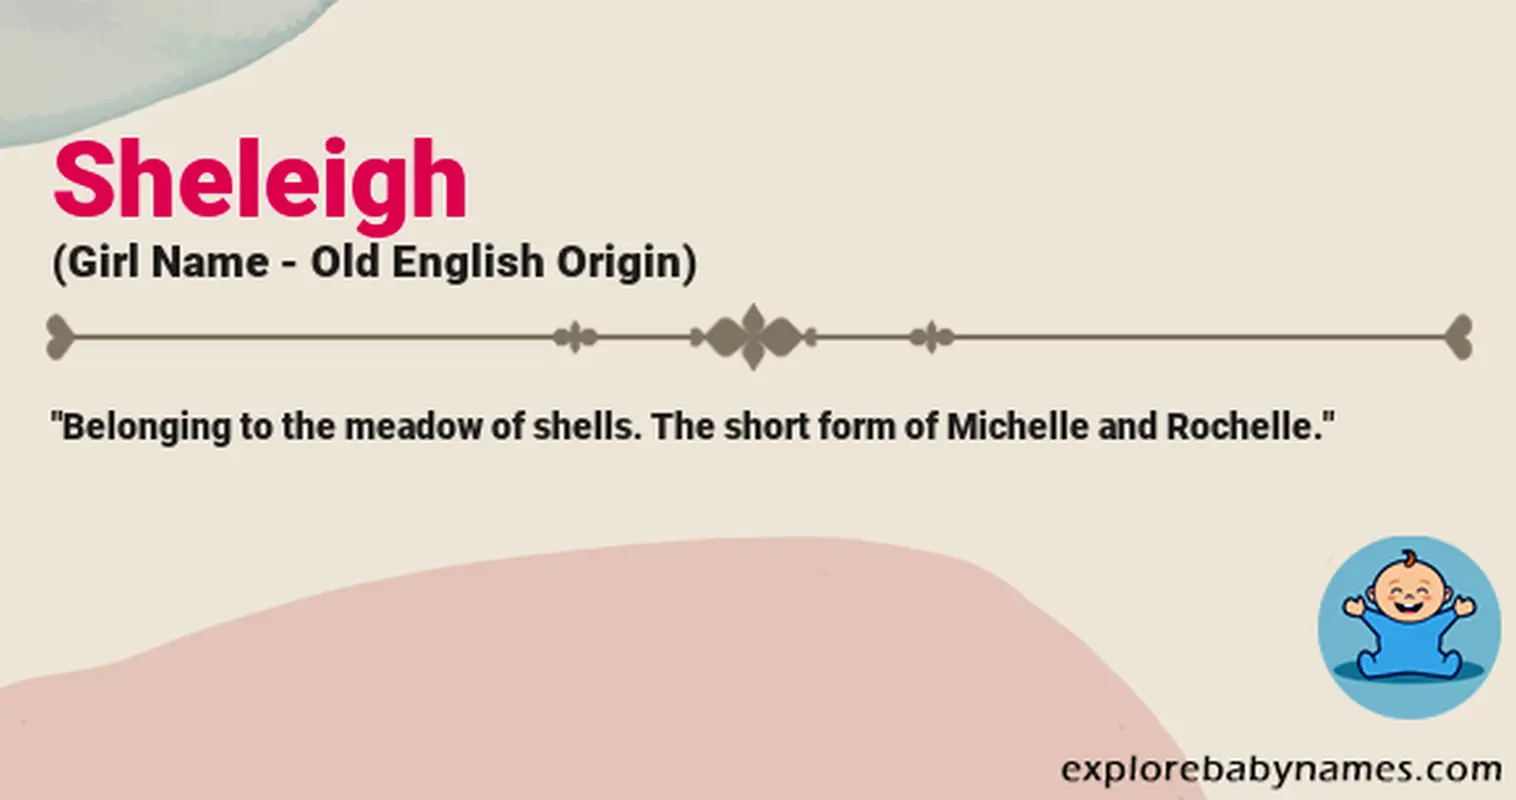 Meaning of Sheleigh